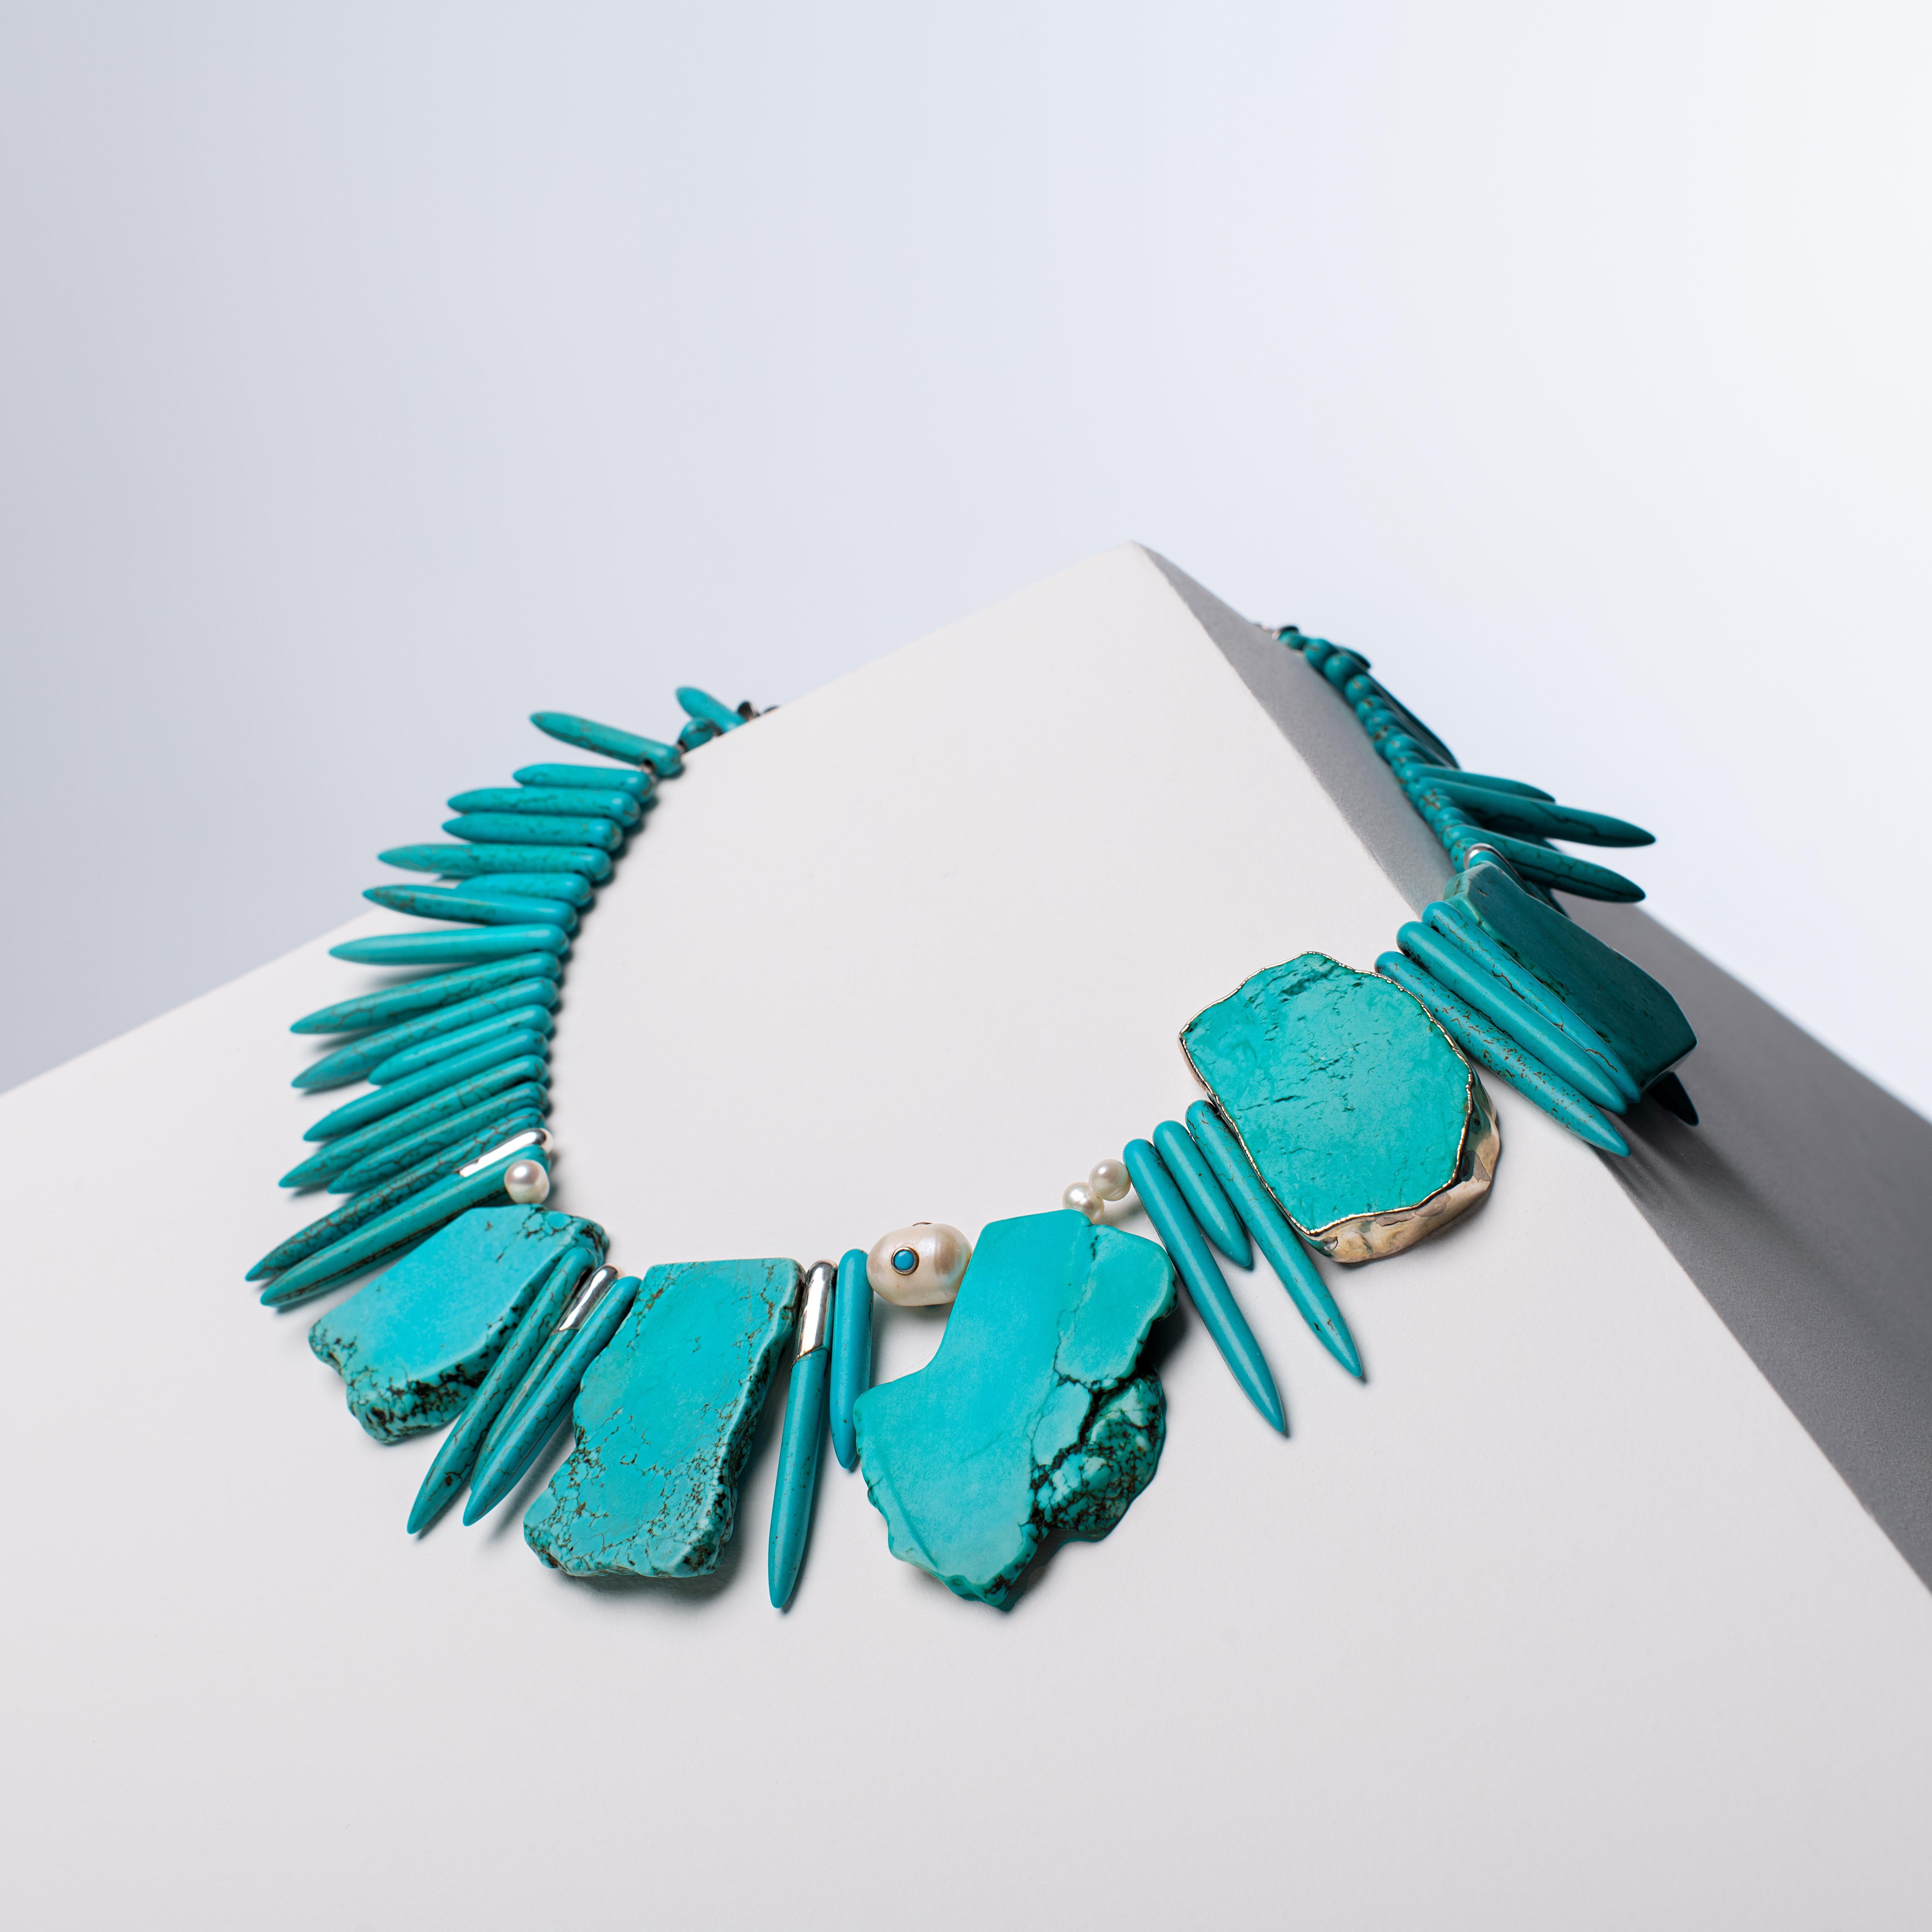 - Dynamic and unique necklace featuring two distinct cuts of Turquoise Howlite — slab and spike — artfully combined with natural pearls for a stunning visual contrast
- Each necklace presents a one-of-a-kind design, shaped by the natural form of the